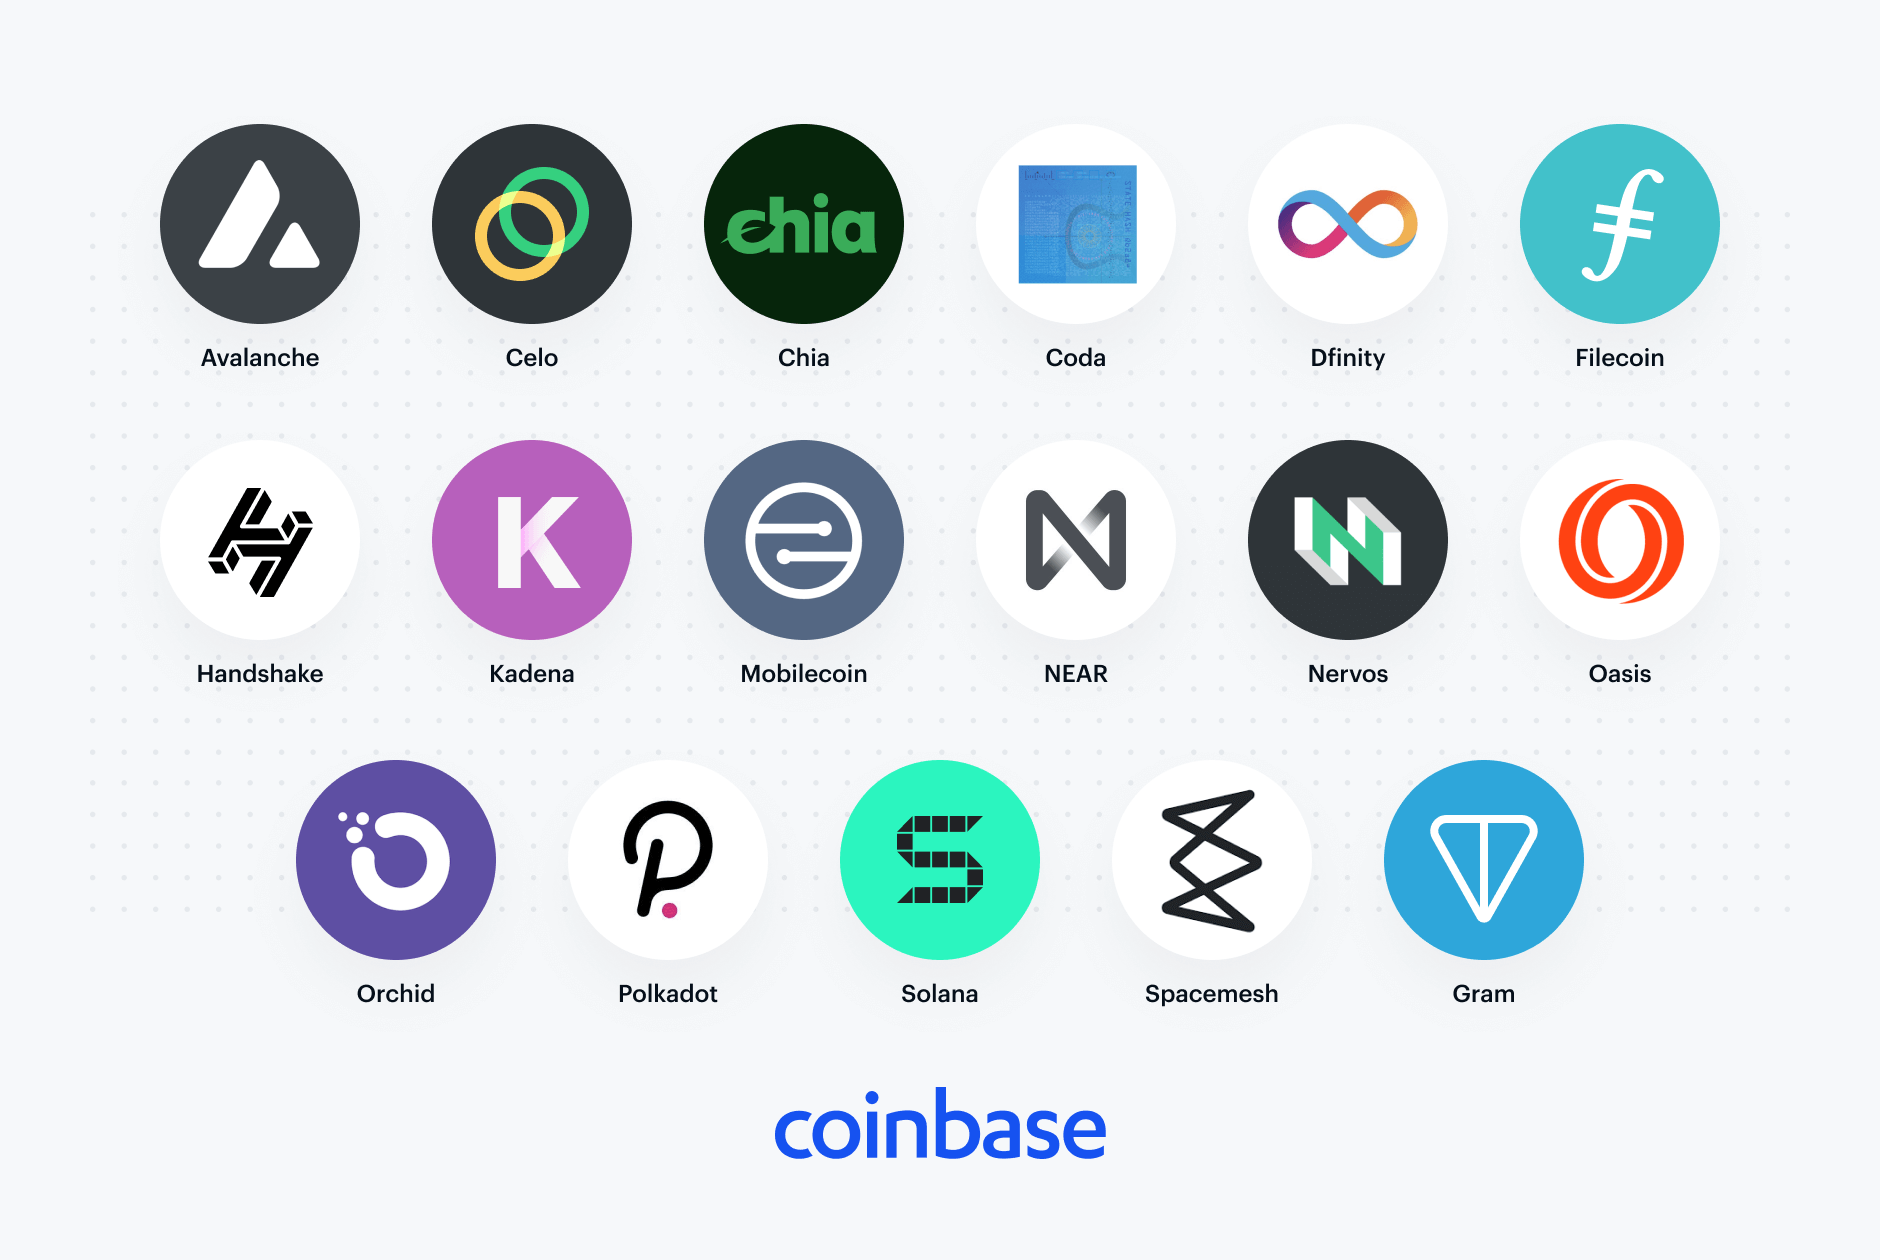 Coinbase continues to explore support for new digital assets